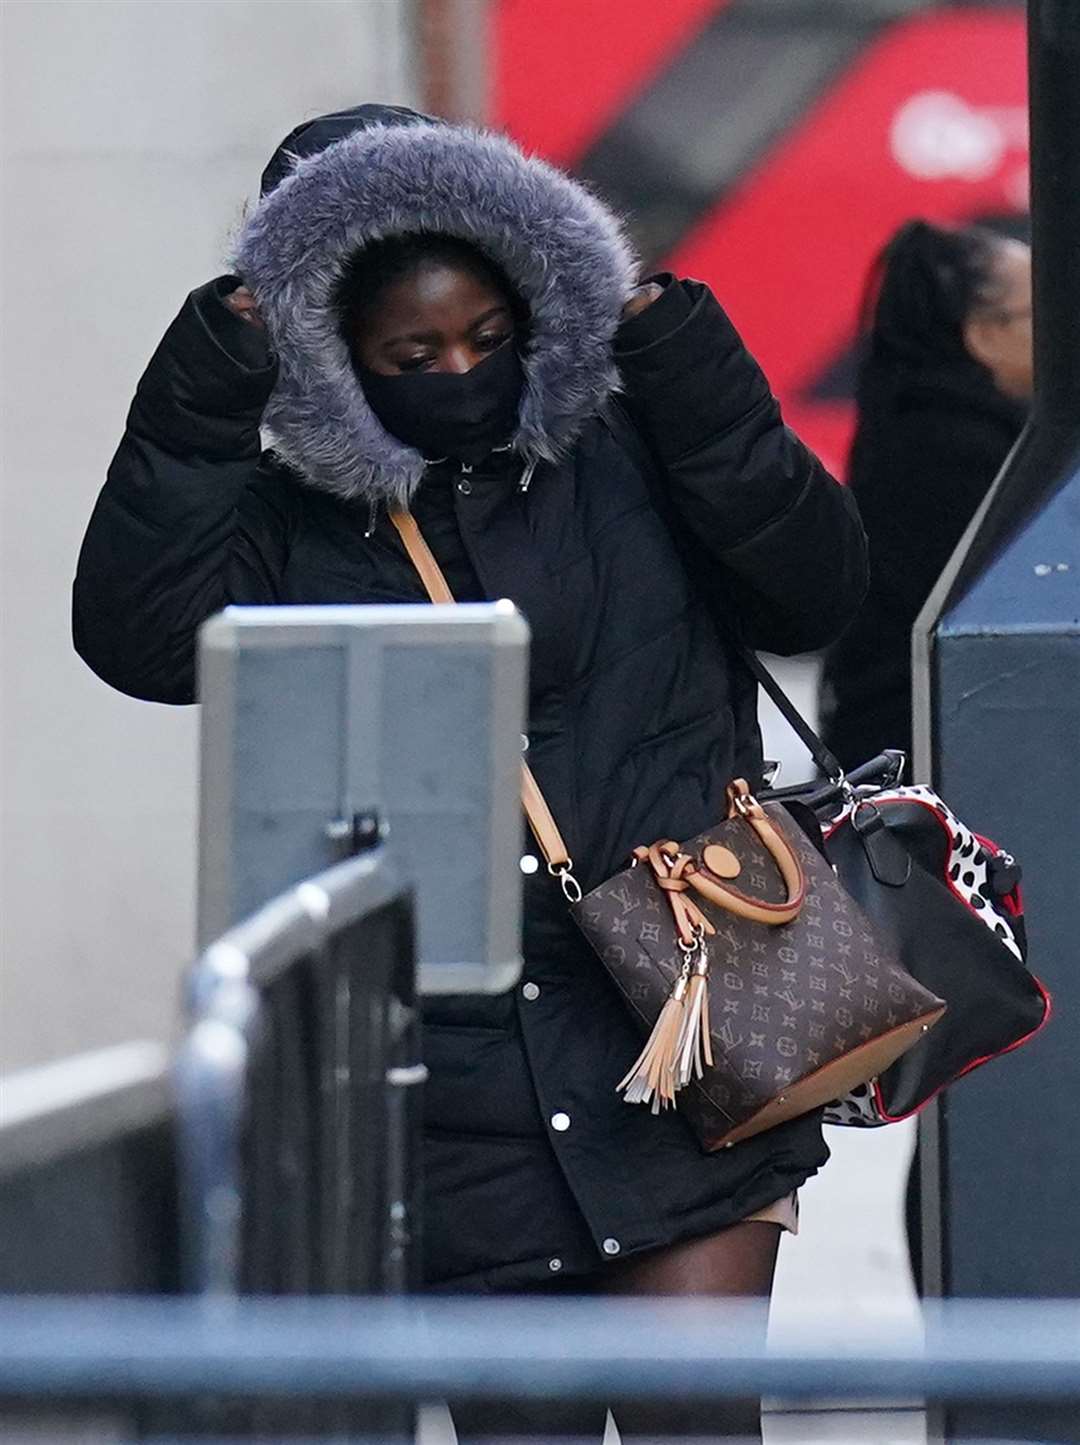 Tamika Beaton arrives at the Old Bailey in central London for sentencing (Jonathan Brady/PA)